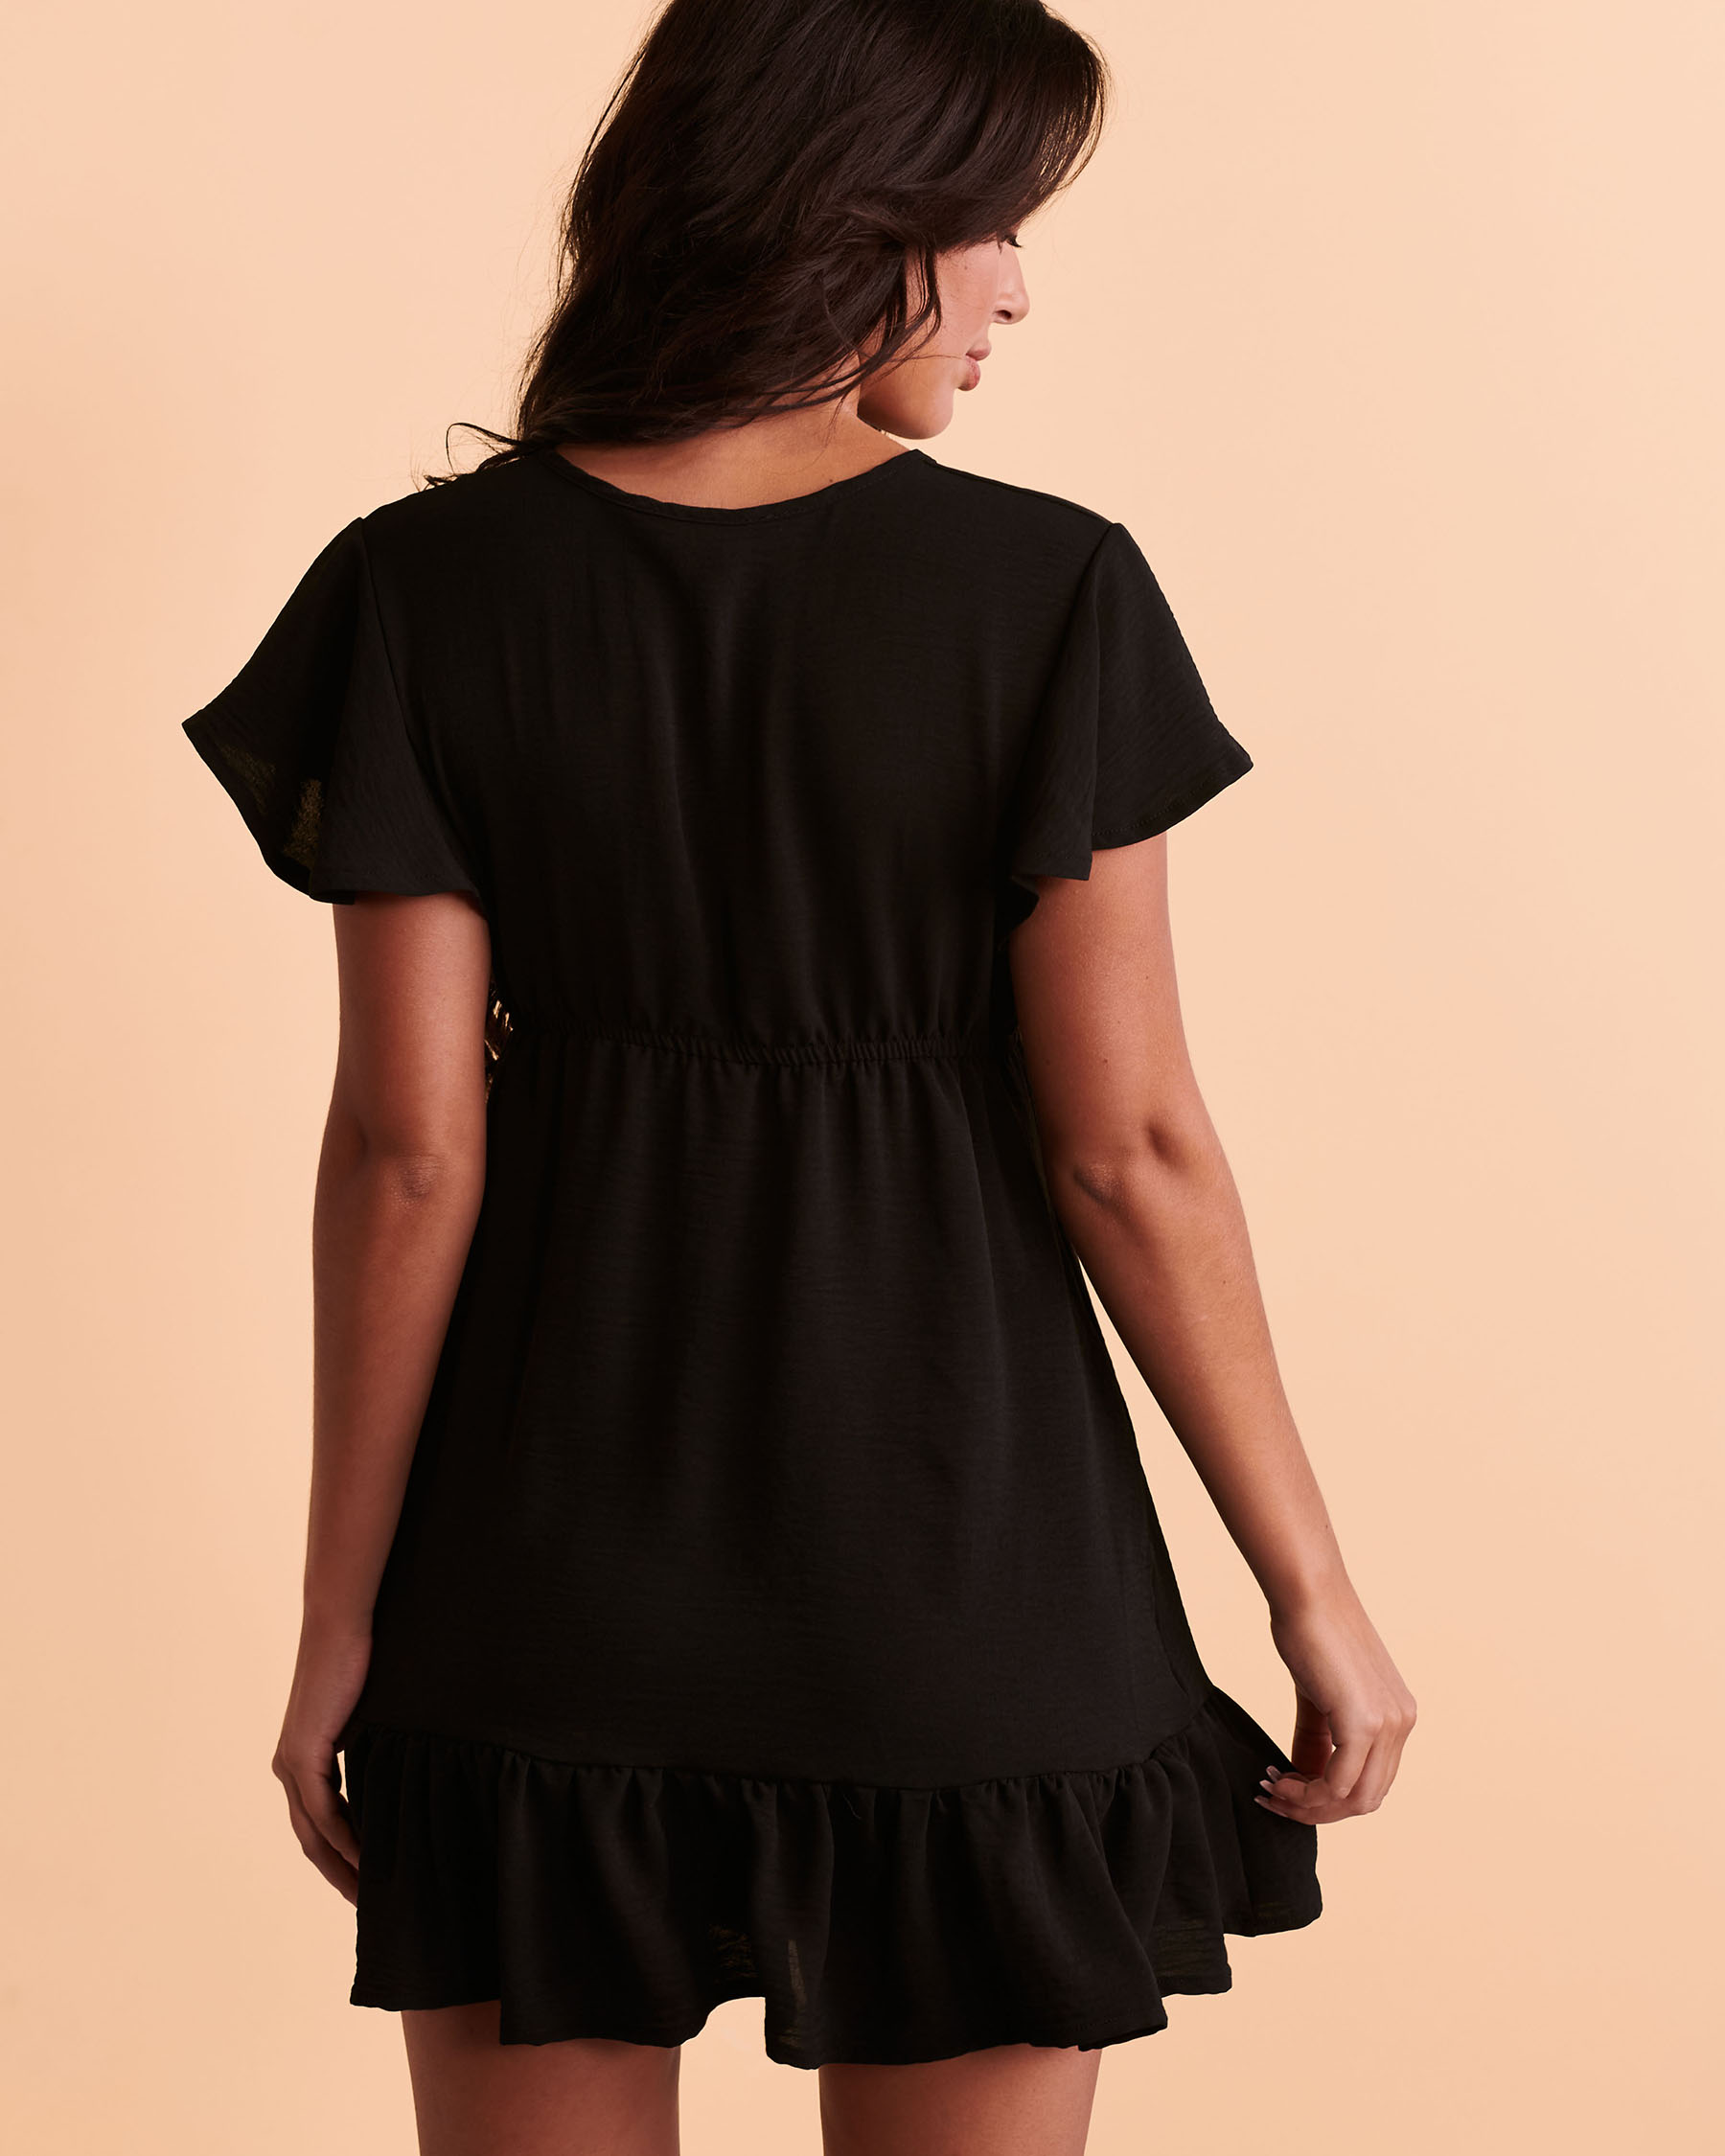 COVER ME Short Sleeves Airflow Dress Black 23022507 - View2